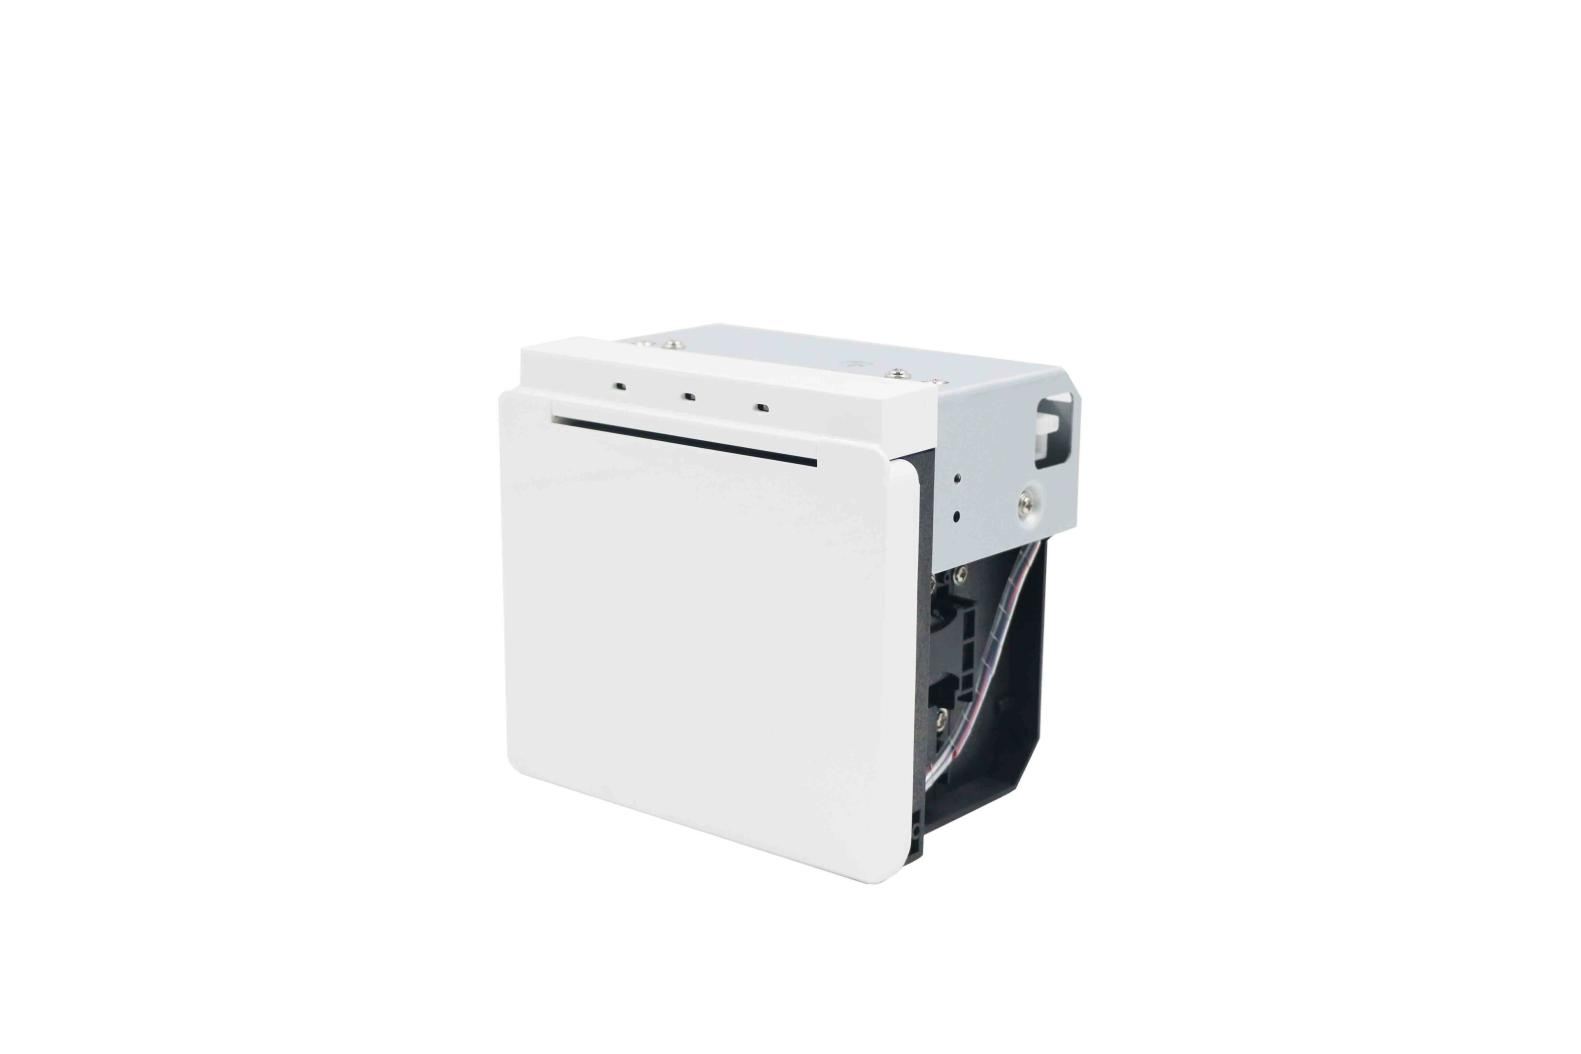 Designed Structure Panel Thermal Printer MS-FPT302 for New Retails